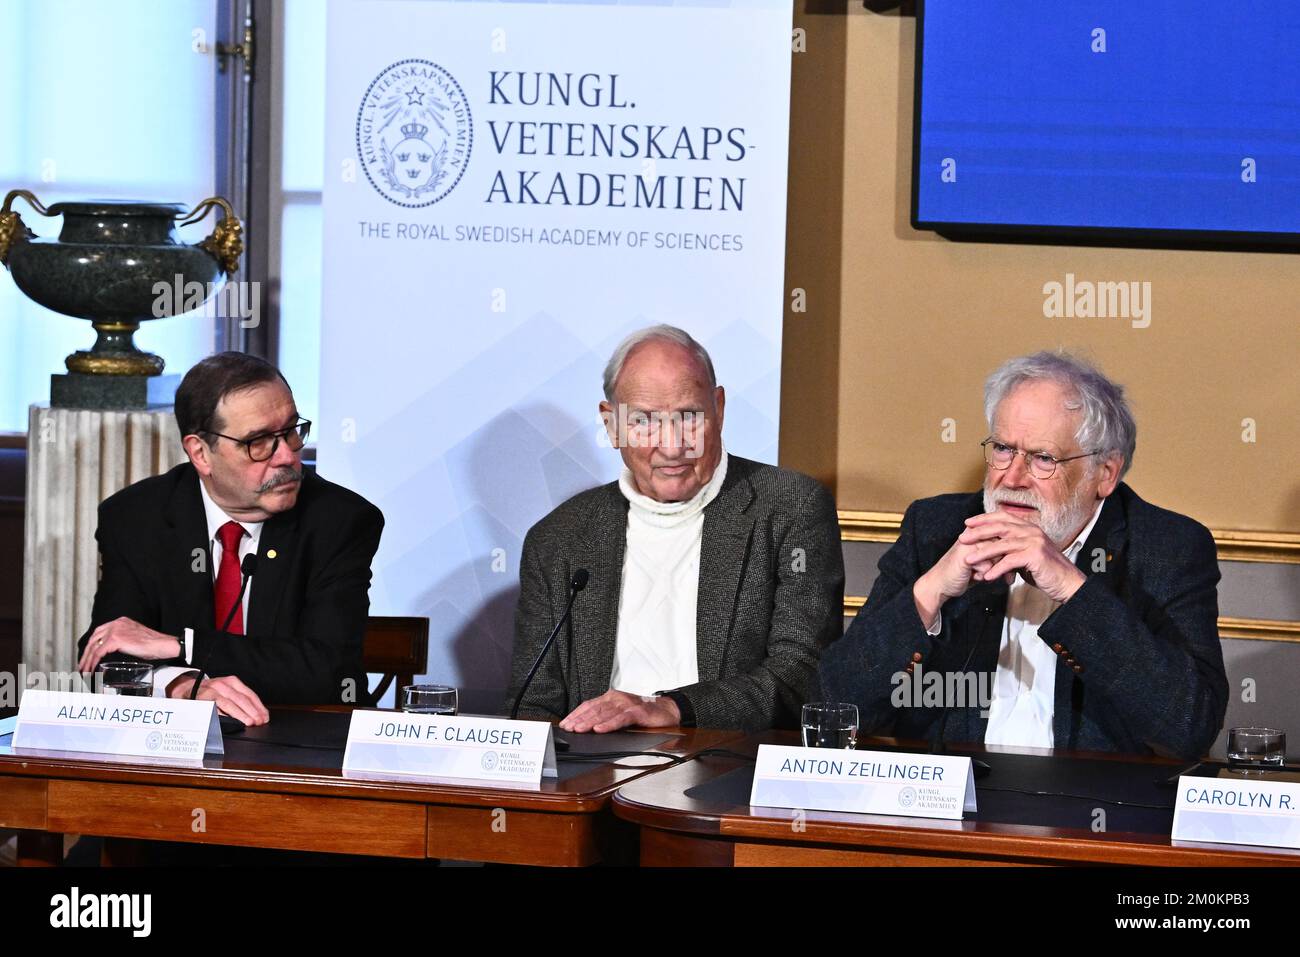 Nobel Prize laureates Alain Aspect, (physics), John F. Clauser (physics) and Anton Zeilinger (physics) during a press conference at the Royal Swedish Academy of Science in Stockholm, Sweden, on December 7, 2022. Photo: Claudio Bresciani/ TT / code 10090 Stock Photo